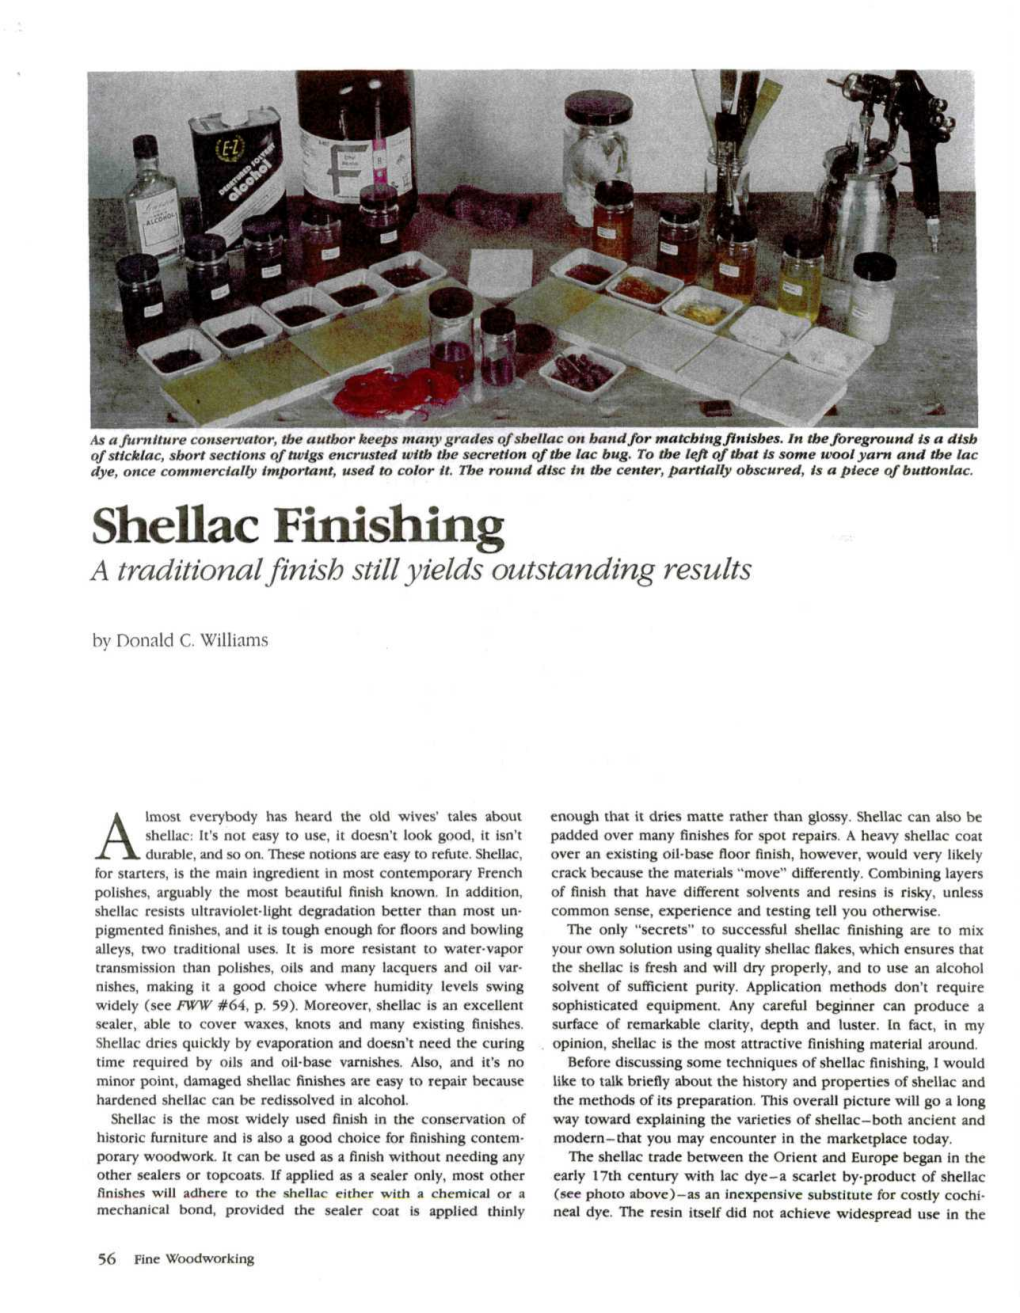 Shellac Finishing a Traditional Finish Still Yields Outstanding Results by Donald C